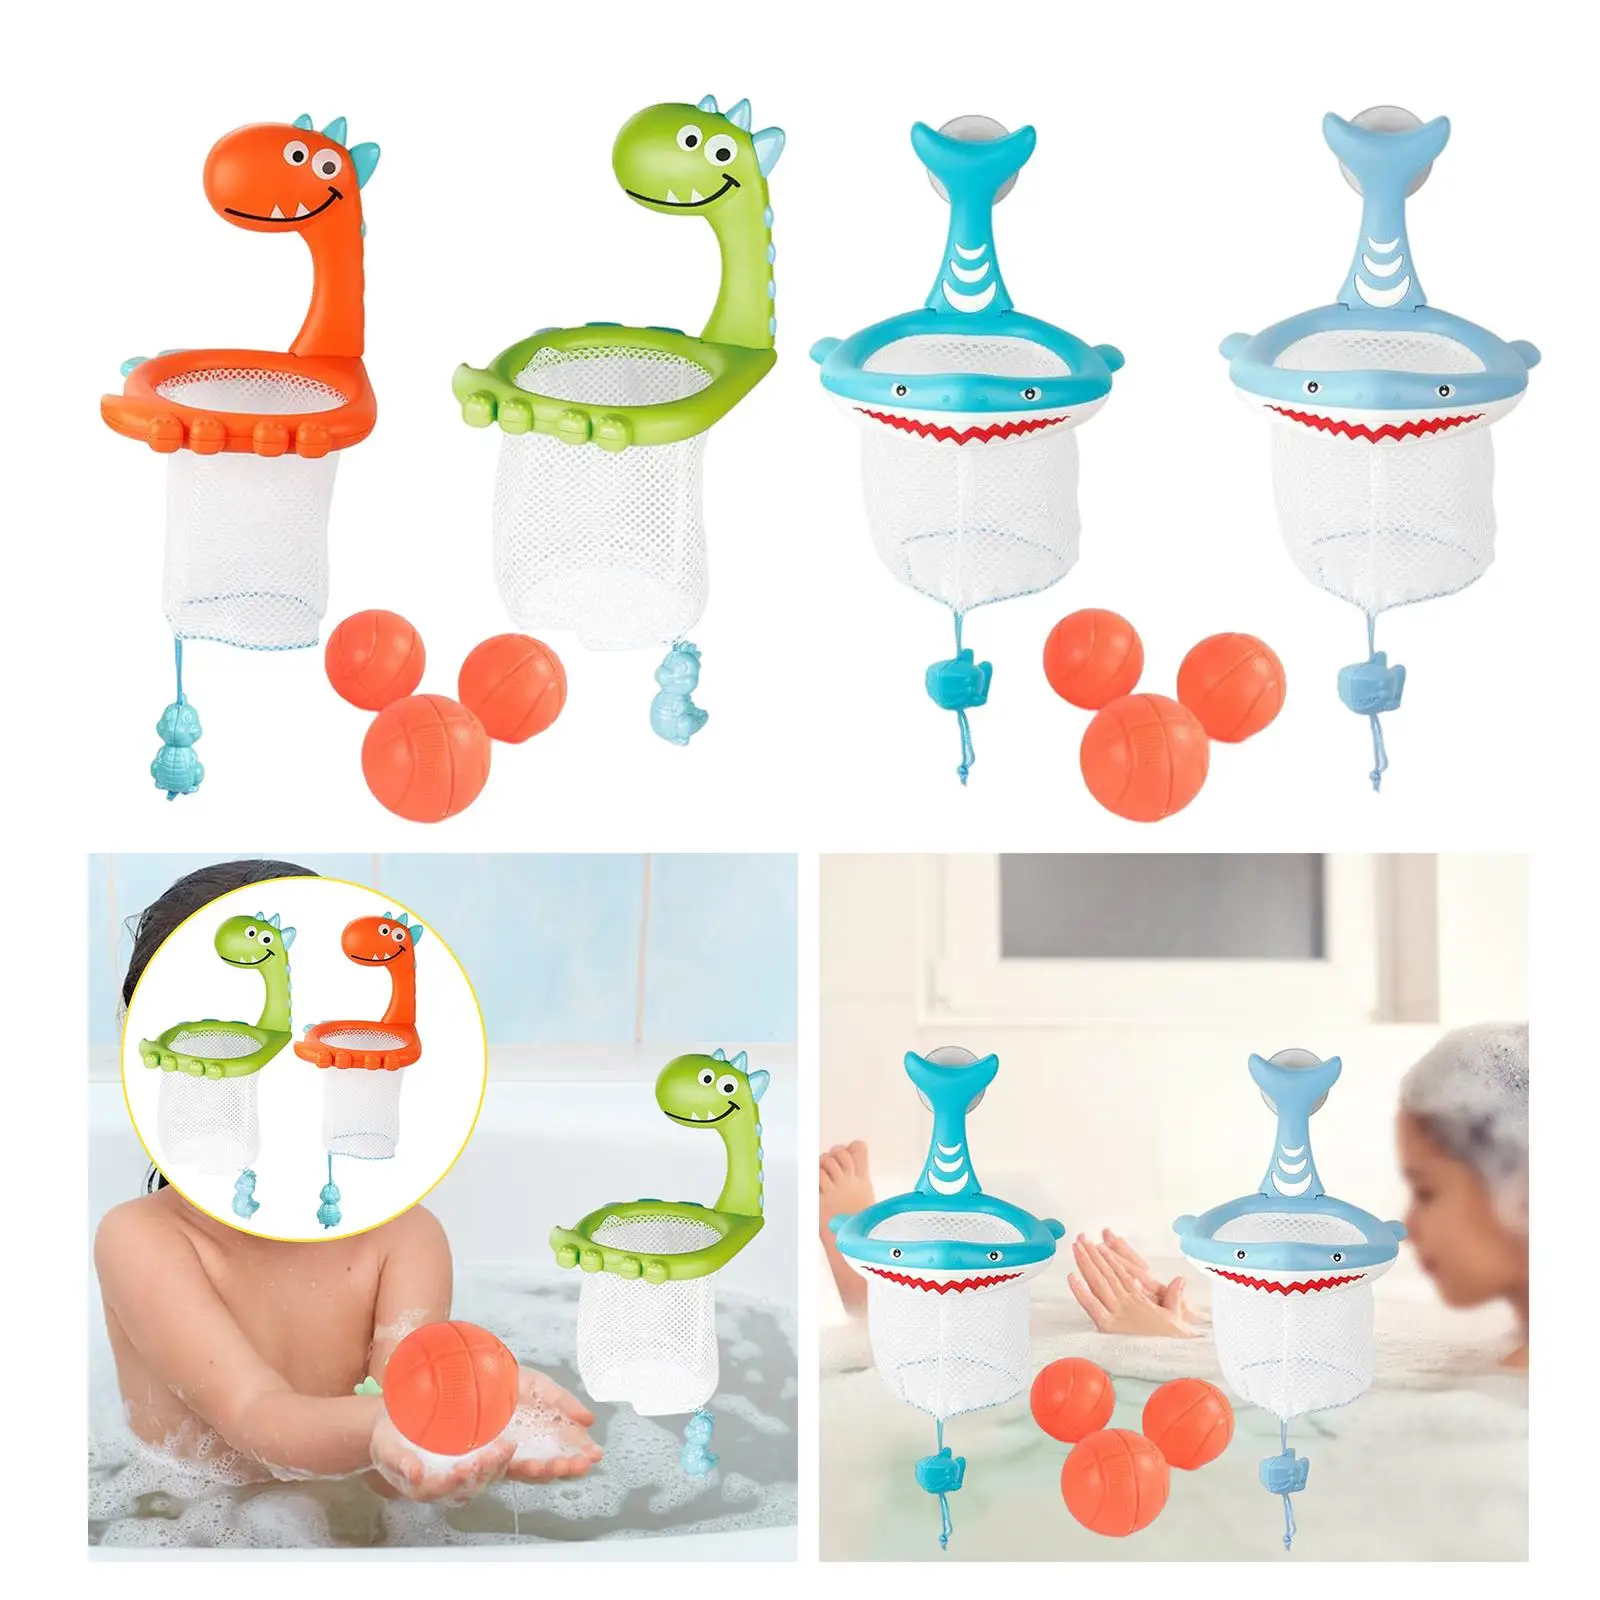 Bathtub Game Toy, Bathtub Basketball Hoop Throw Basket Toys Strong Suction Cup for Toddlers